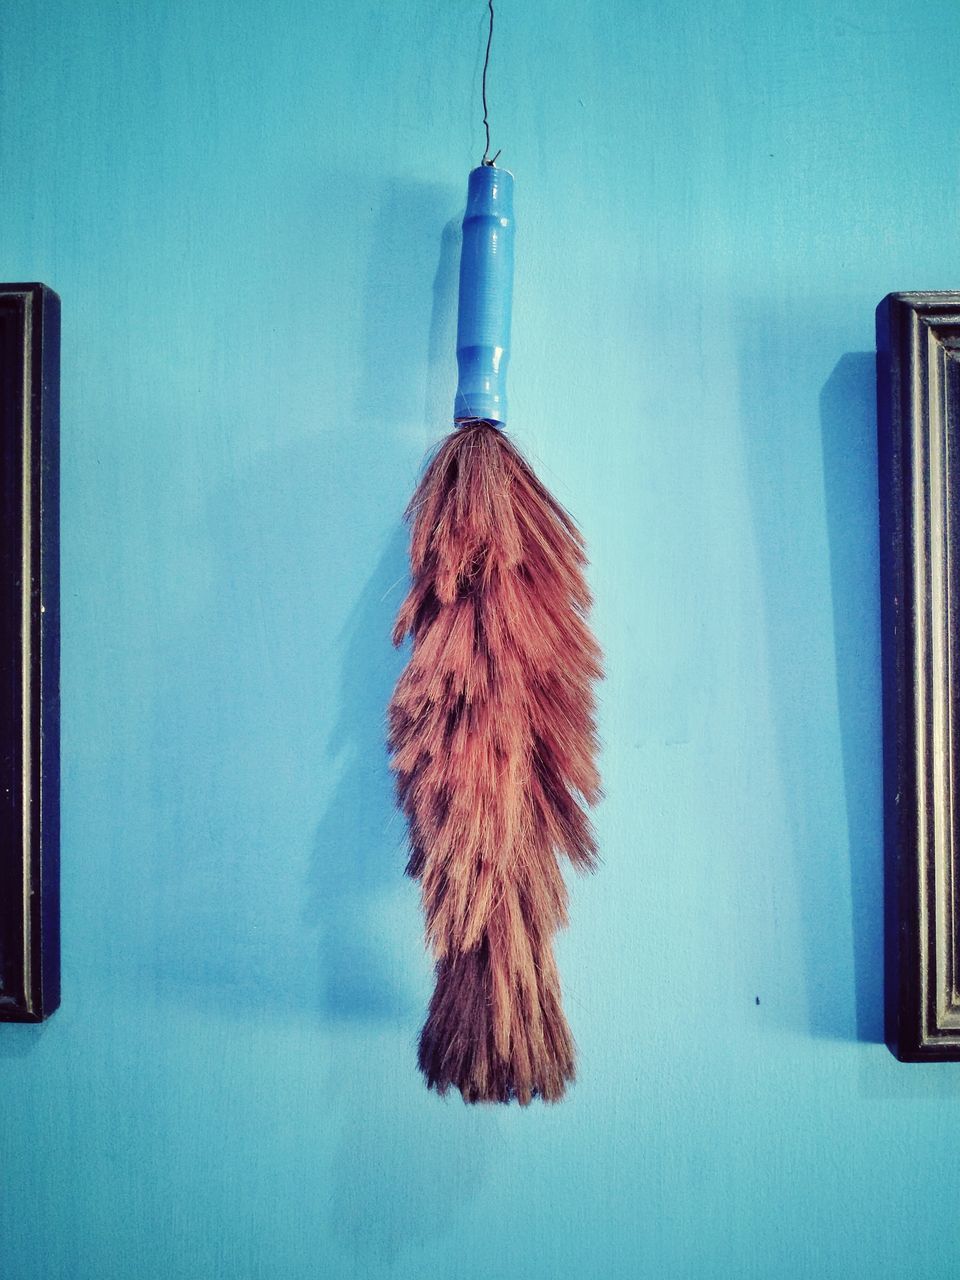 CLOSE-UP OF FEATHER AGAINST BLUE WALL